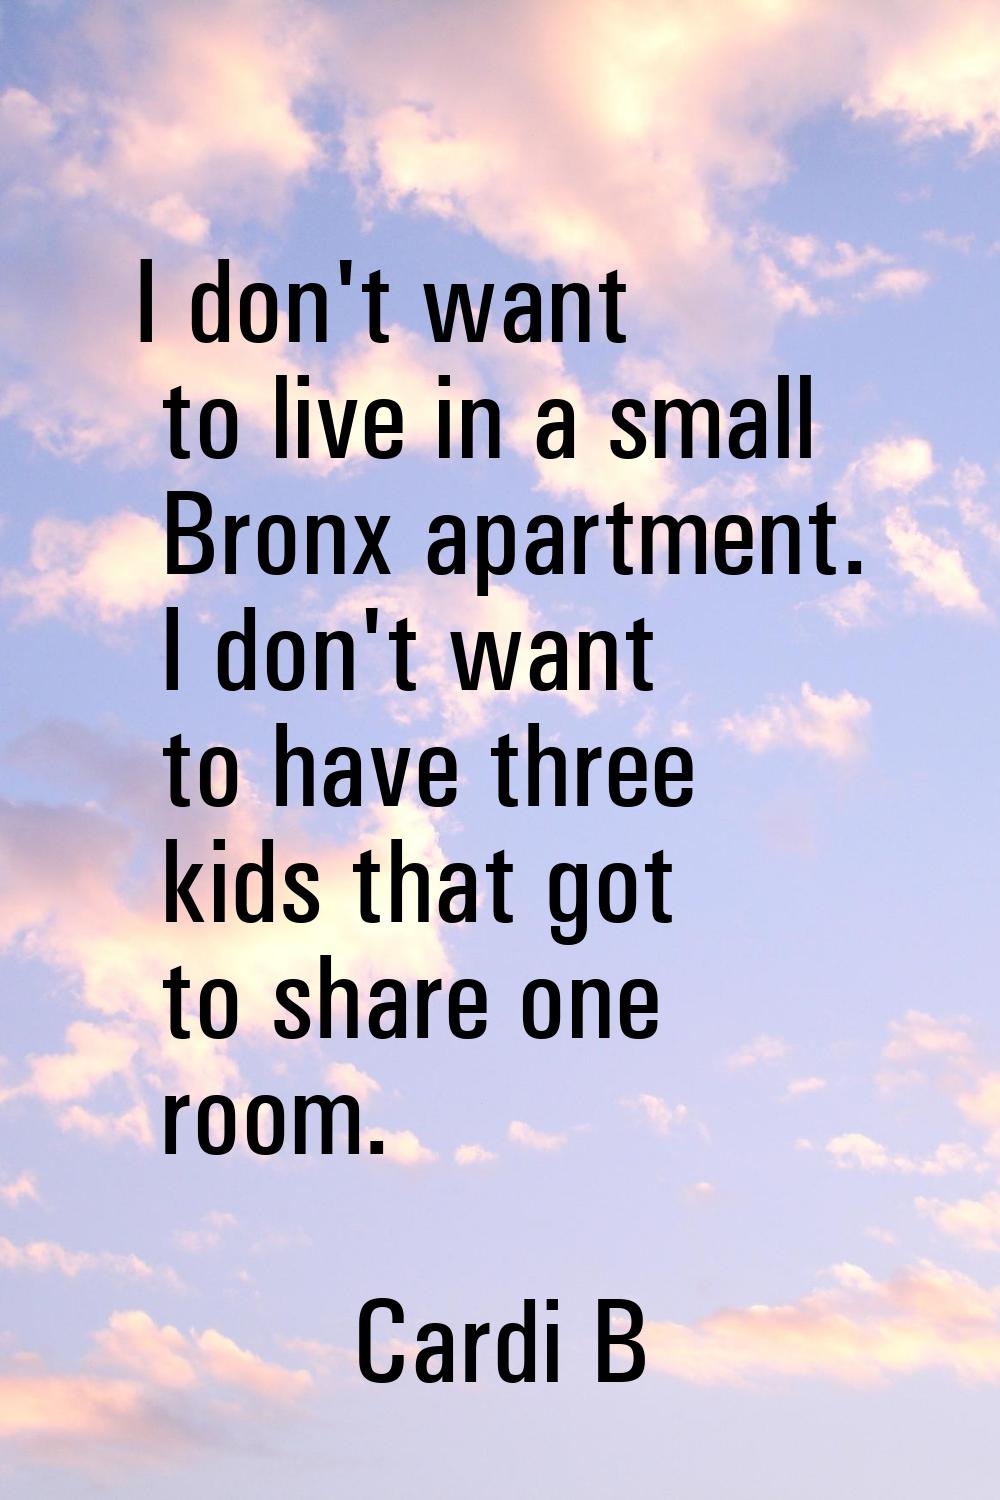 I don't want to live in a small Bronx apartment. I don't want to have three kids that got to share 